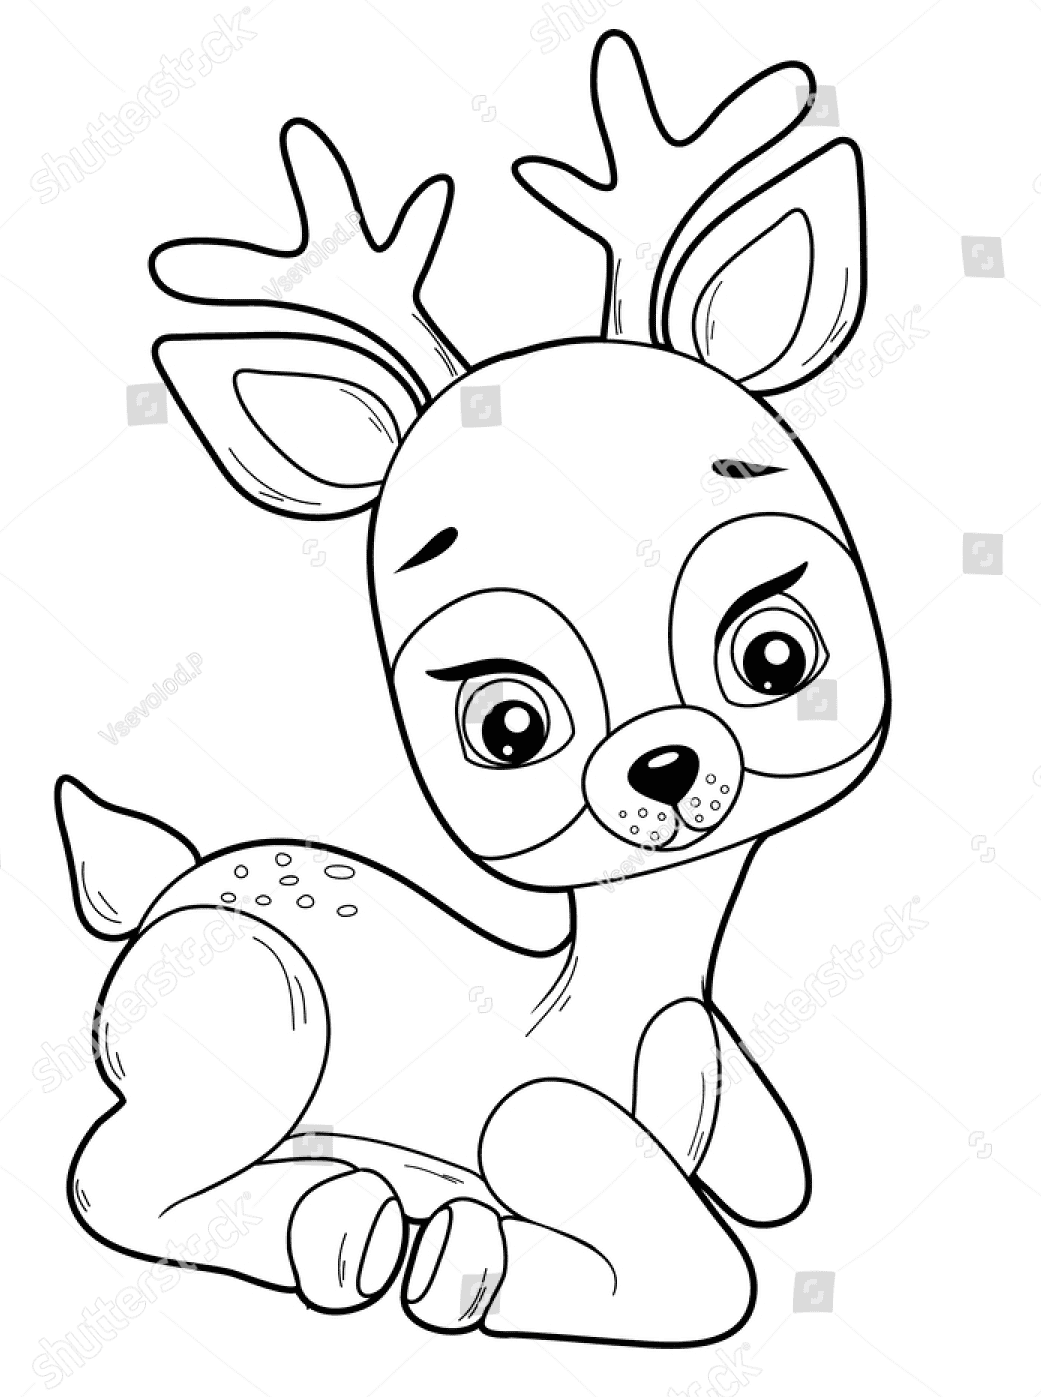 Cute Fawn for Preschool Children Coloring Page